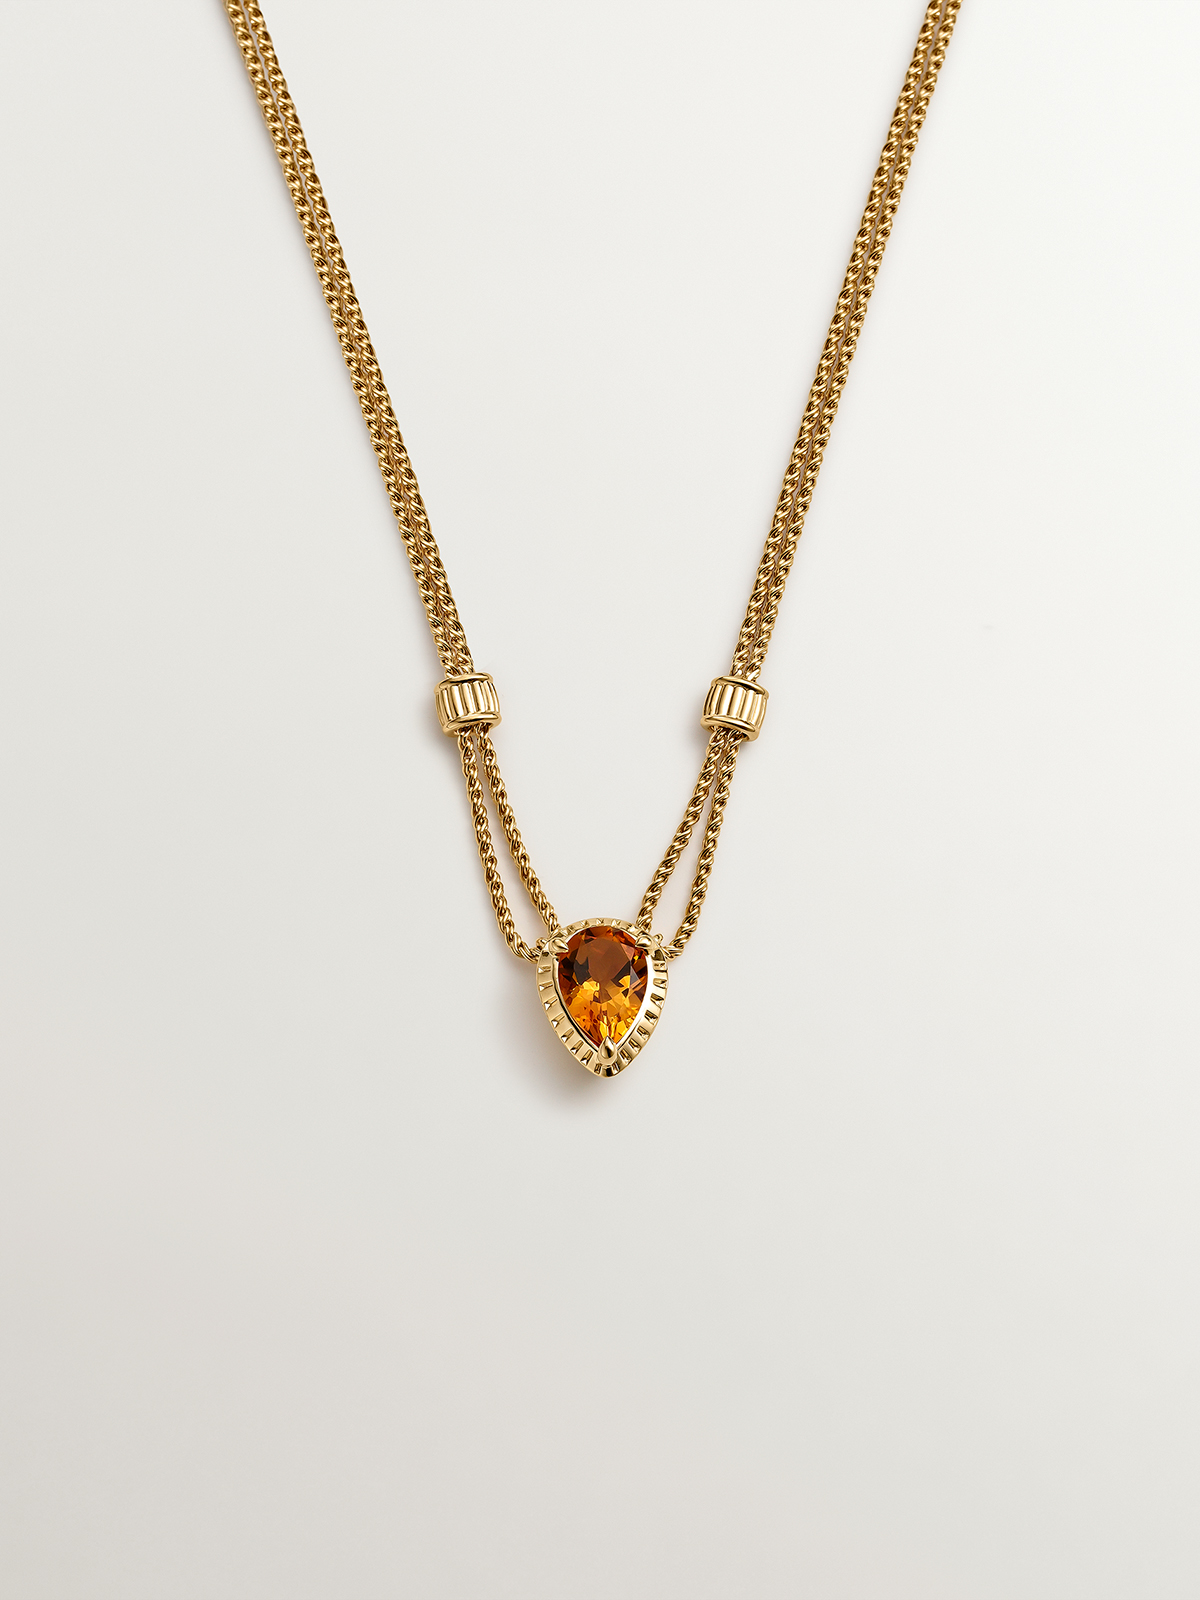 925 Silver pendant bathed in 18K yellow gold with yellow quartz